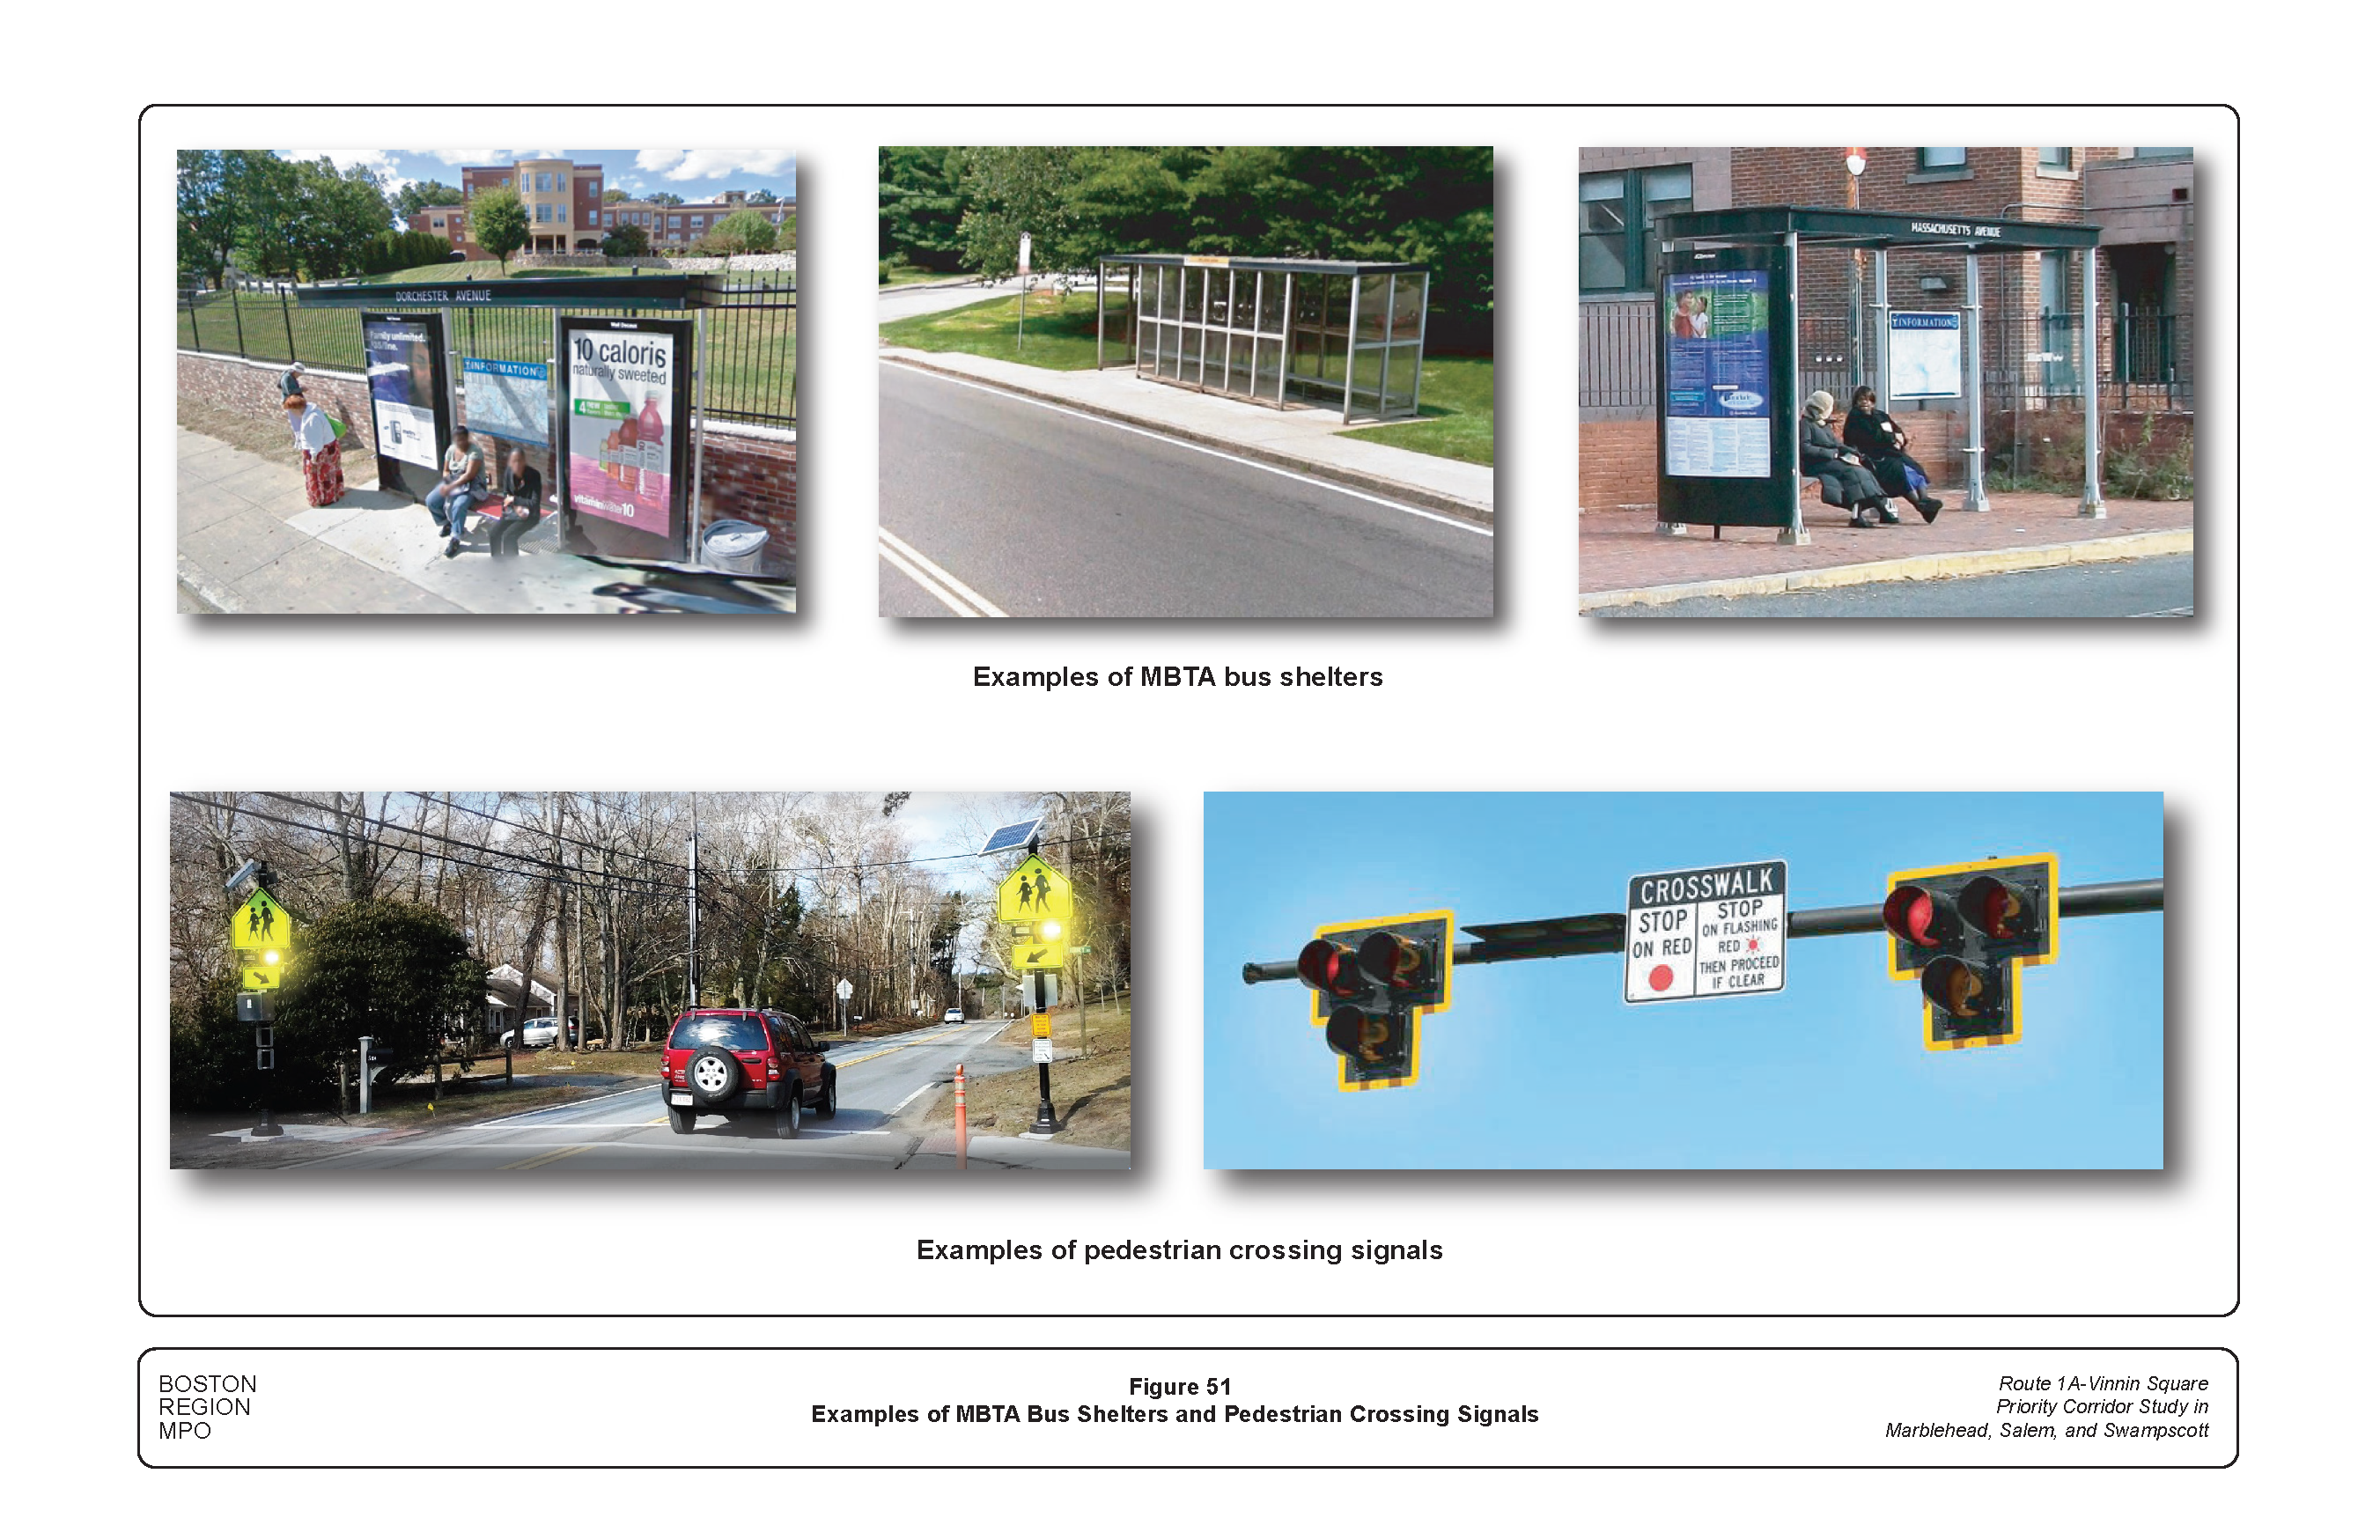 FIGURE 51. Examples of MBTA Bus Shelters and Pedestrian Crossing Signals.Figure 51 contains five photographs showing examples of MBTA bus shelters and pedestrian crossing signals.